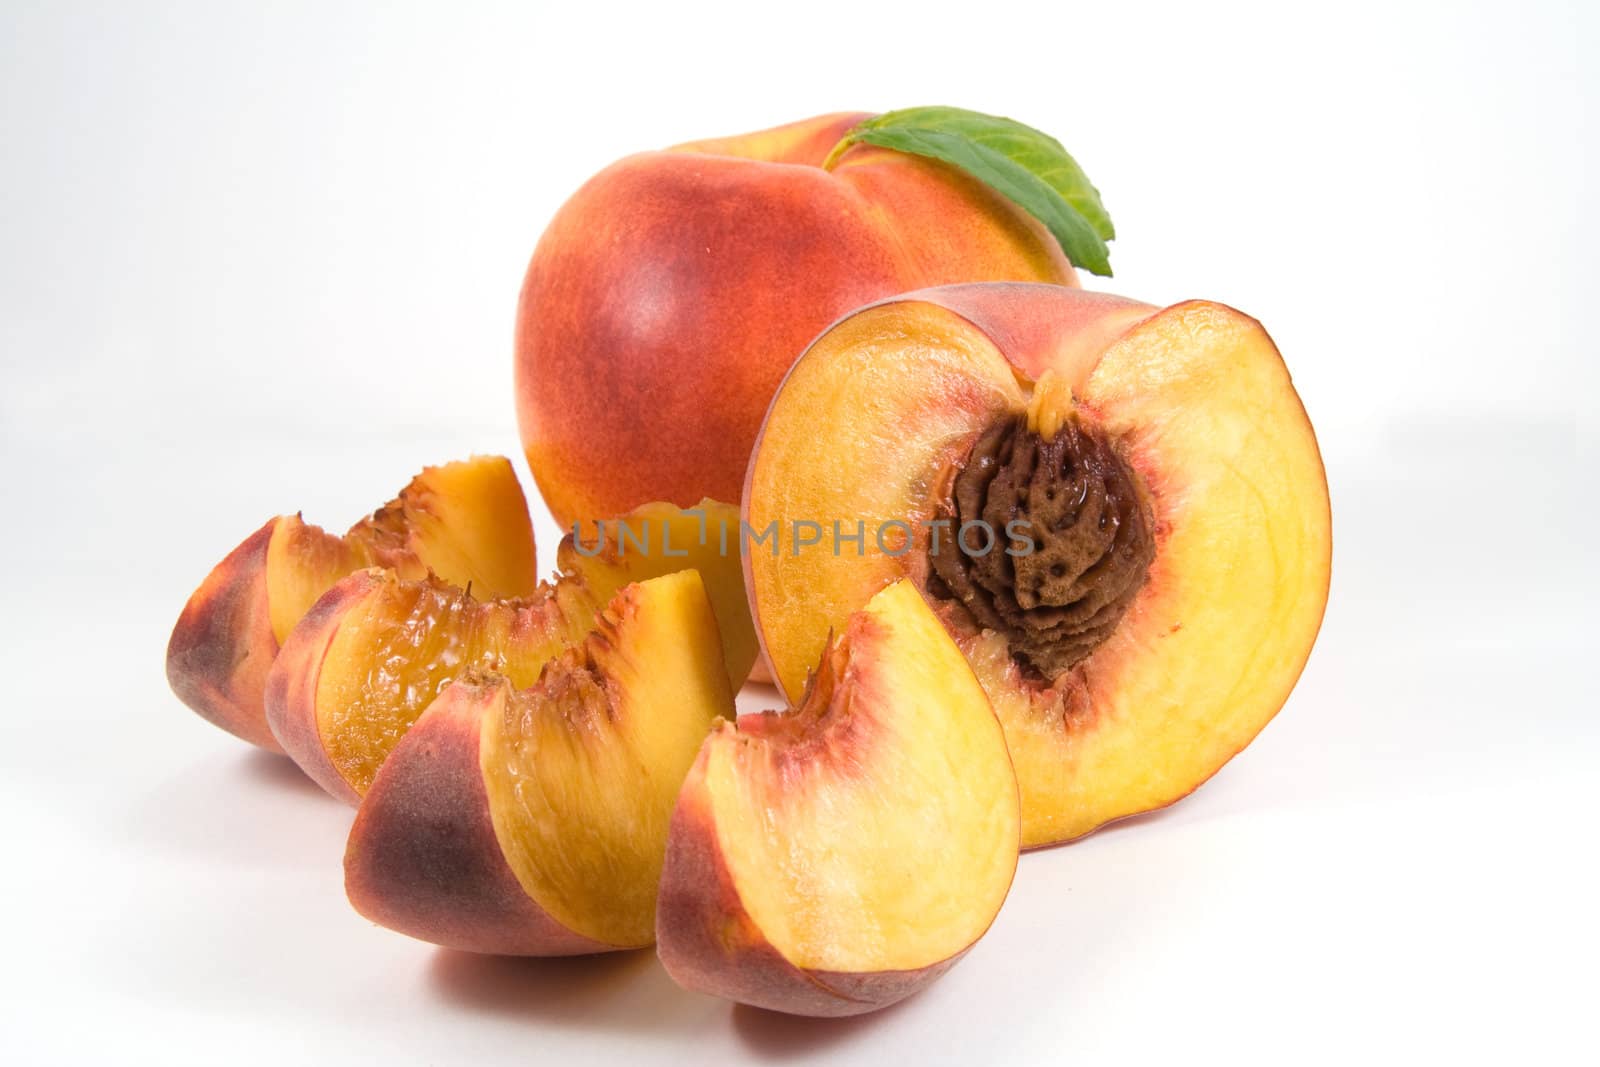 Nectarine, half of peach with pit and pieces on white background